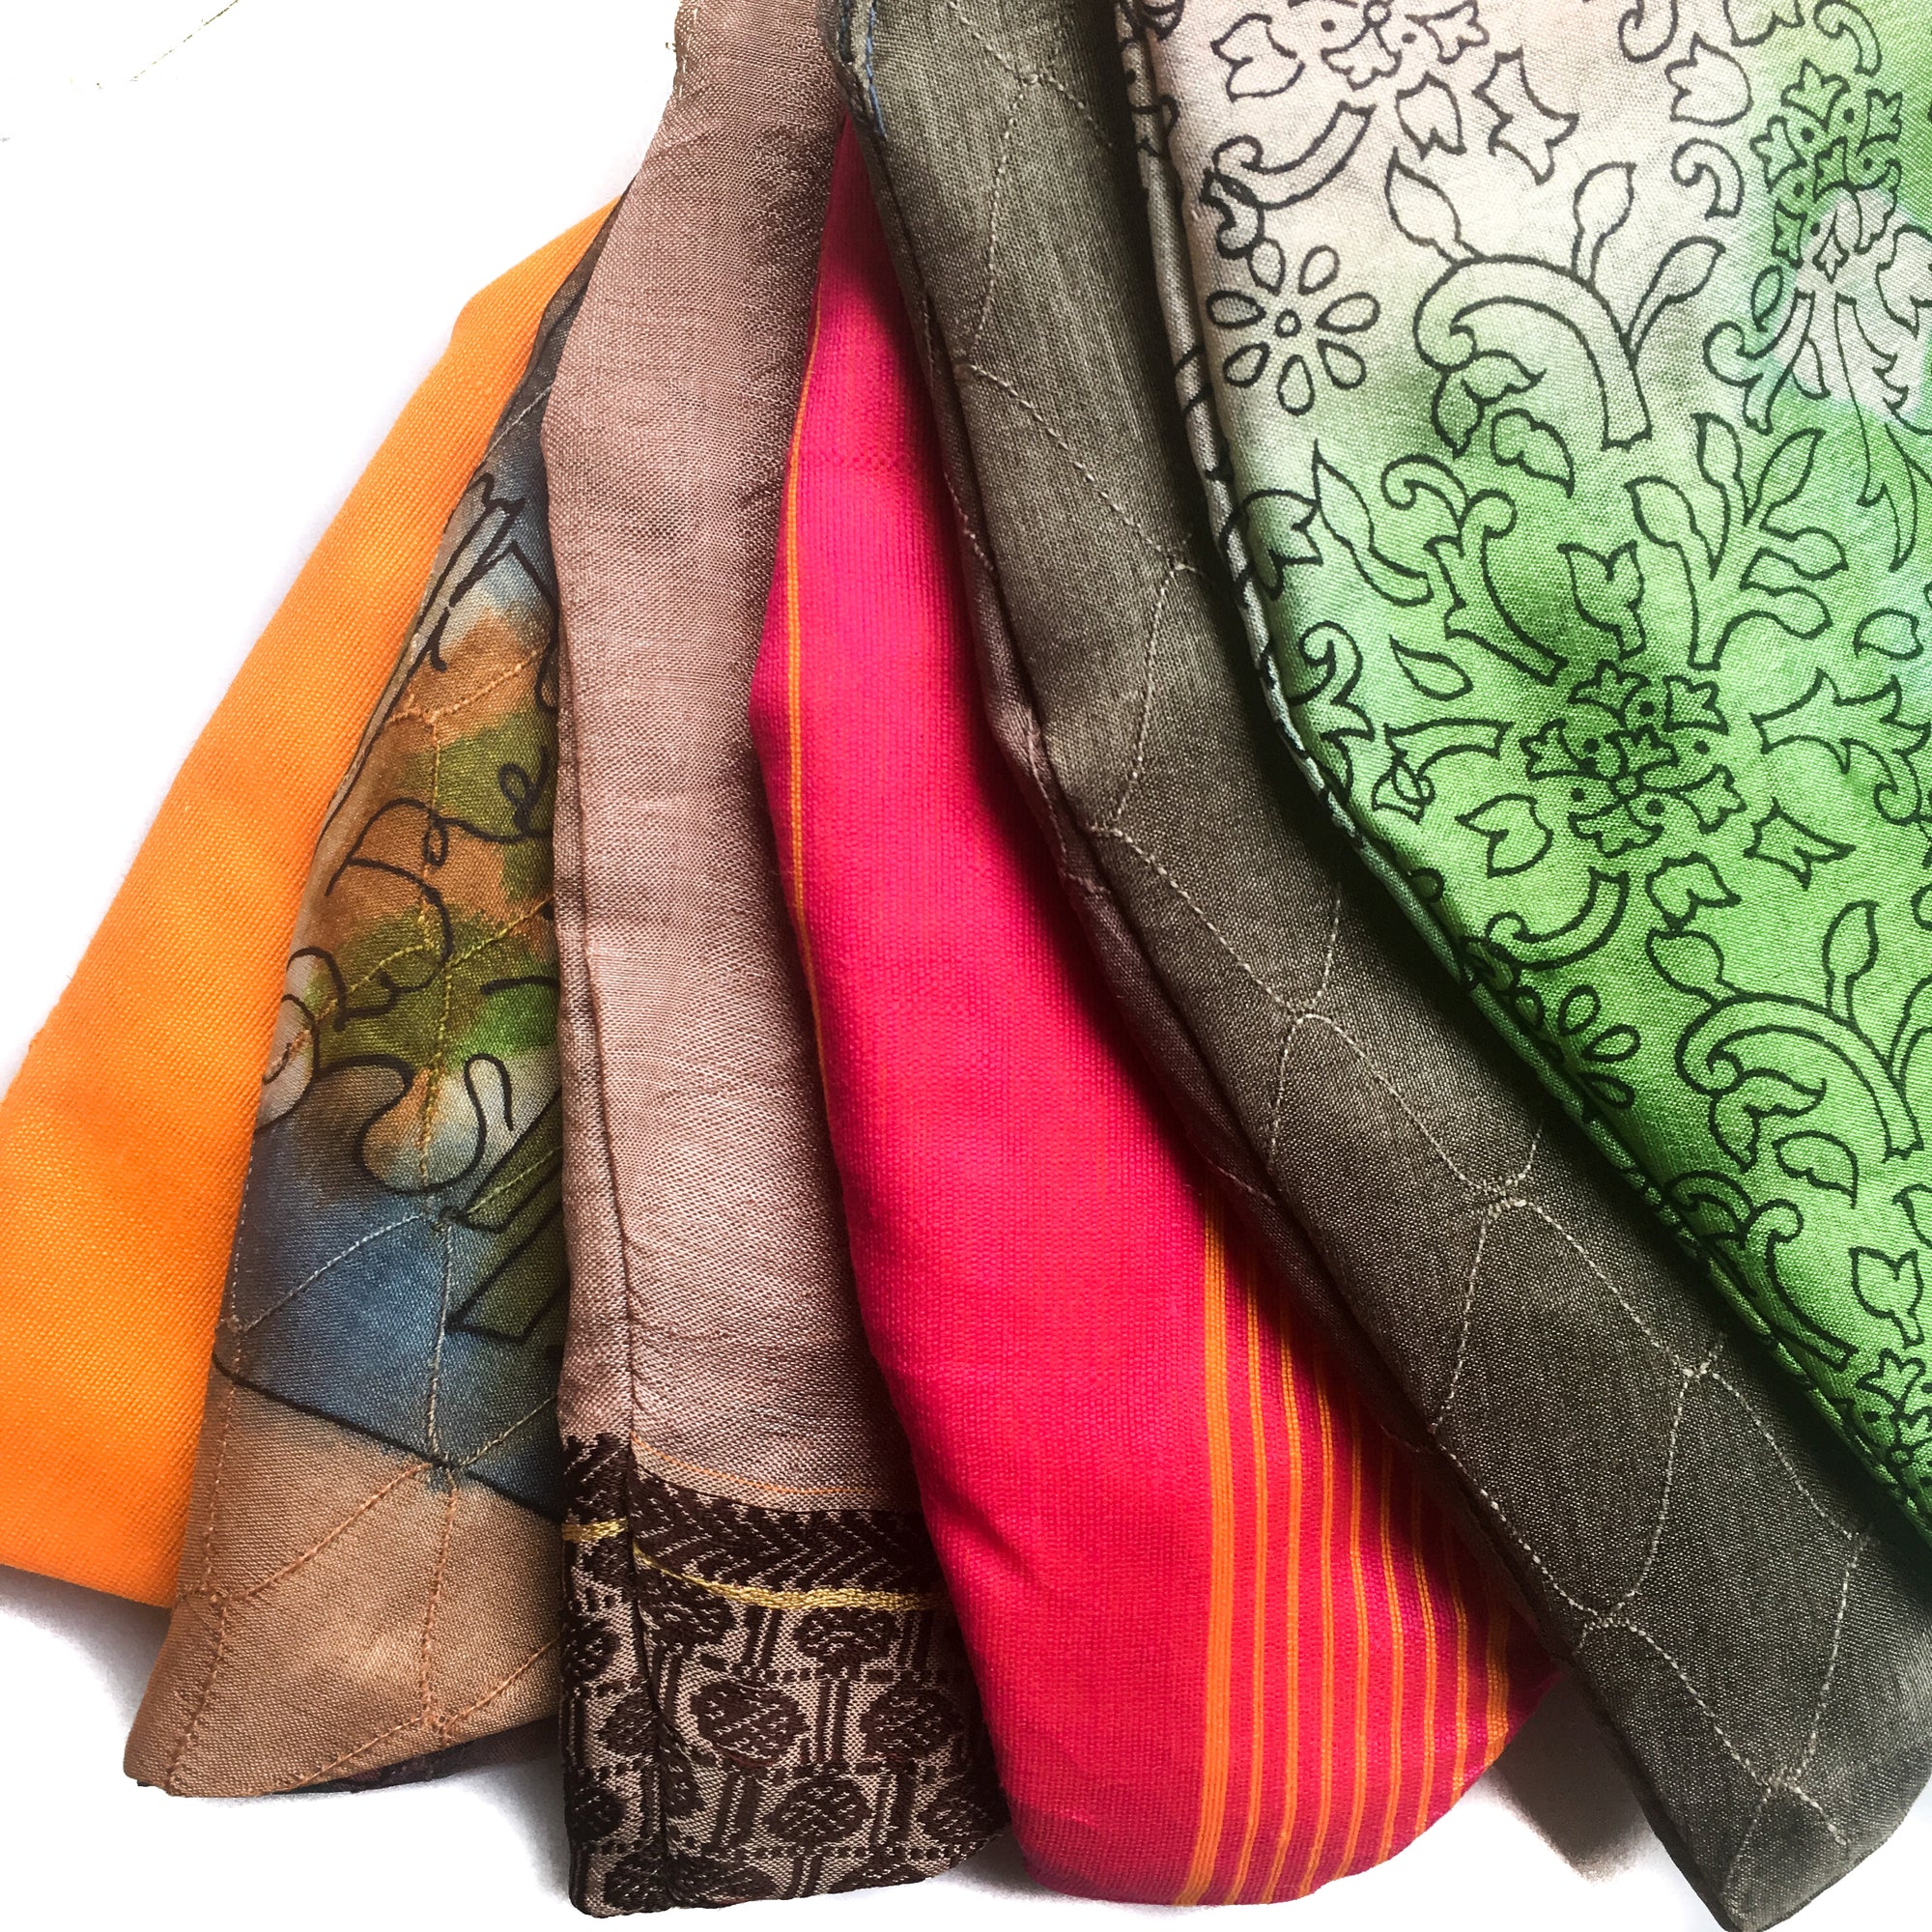 Japa Mala Prayer Bags From Recycled Saris by IndiOdyssey